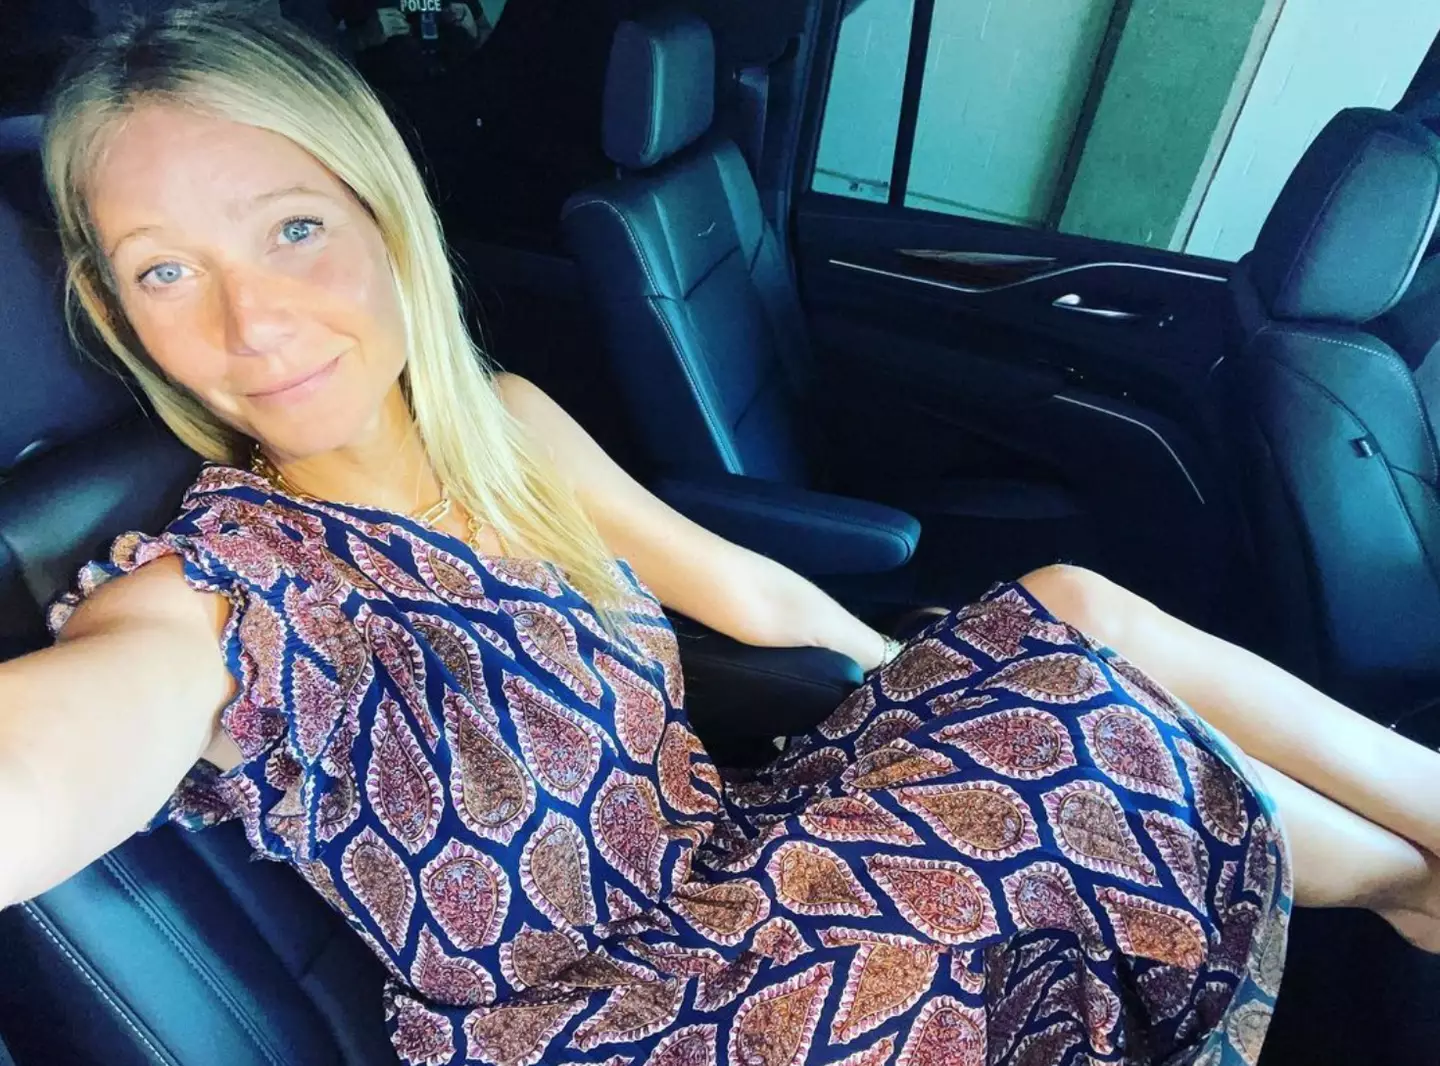 Gwyneth has shared her thoughts on turning 50.